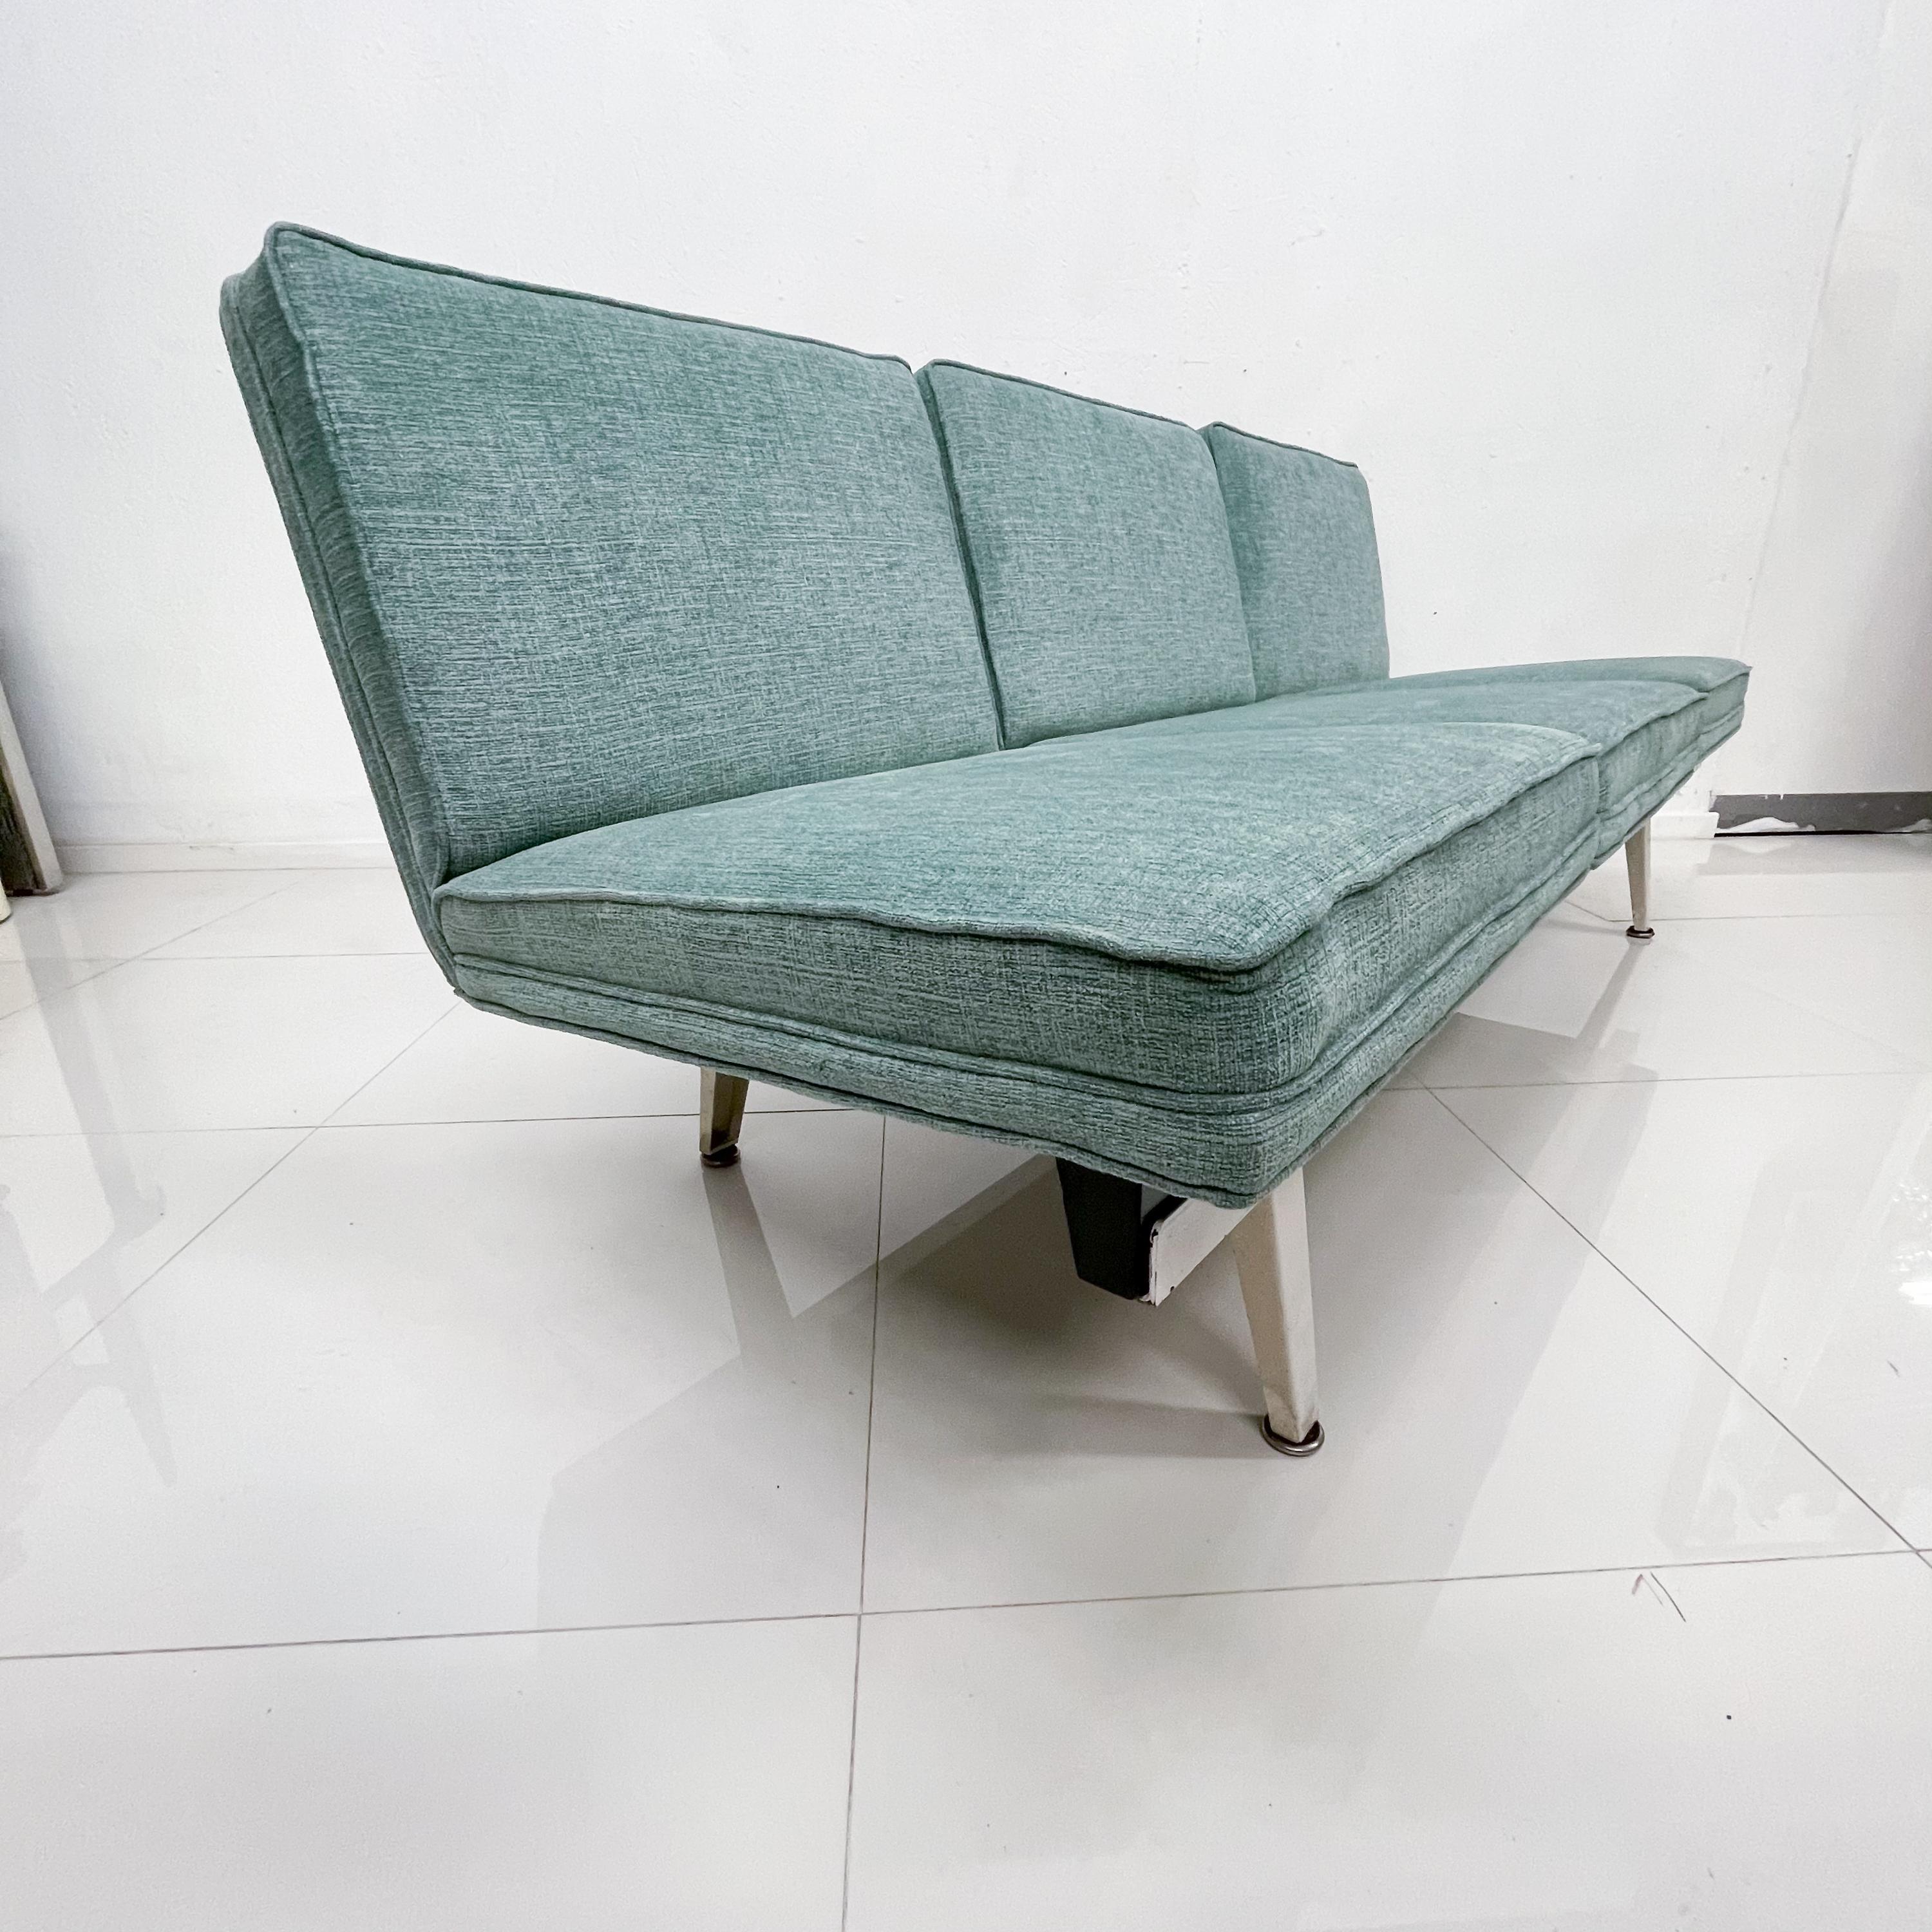 Mid-Century Modern George Nelson Modern Sofa for Herman Miller in Ethereal Mint Green 1950s USA